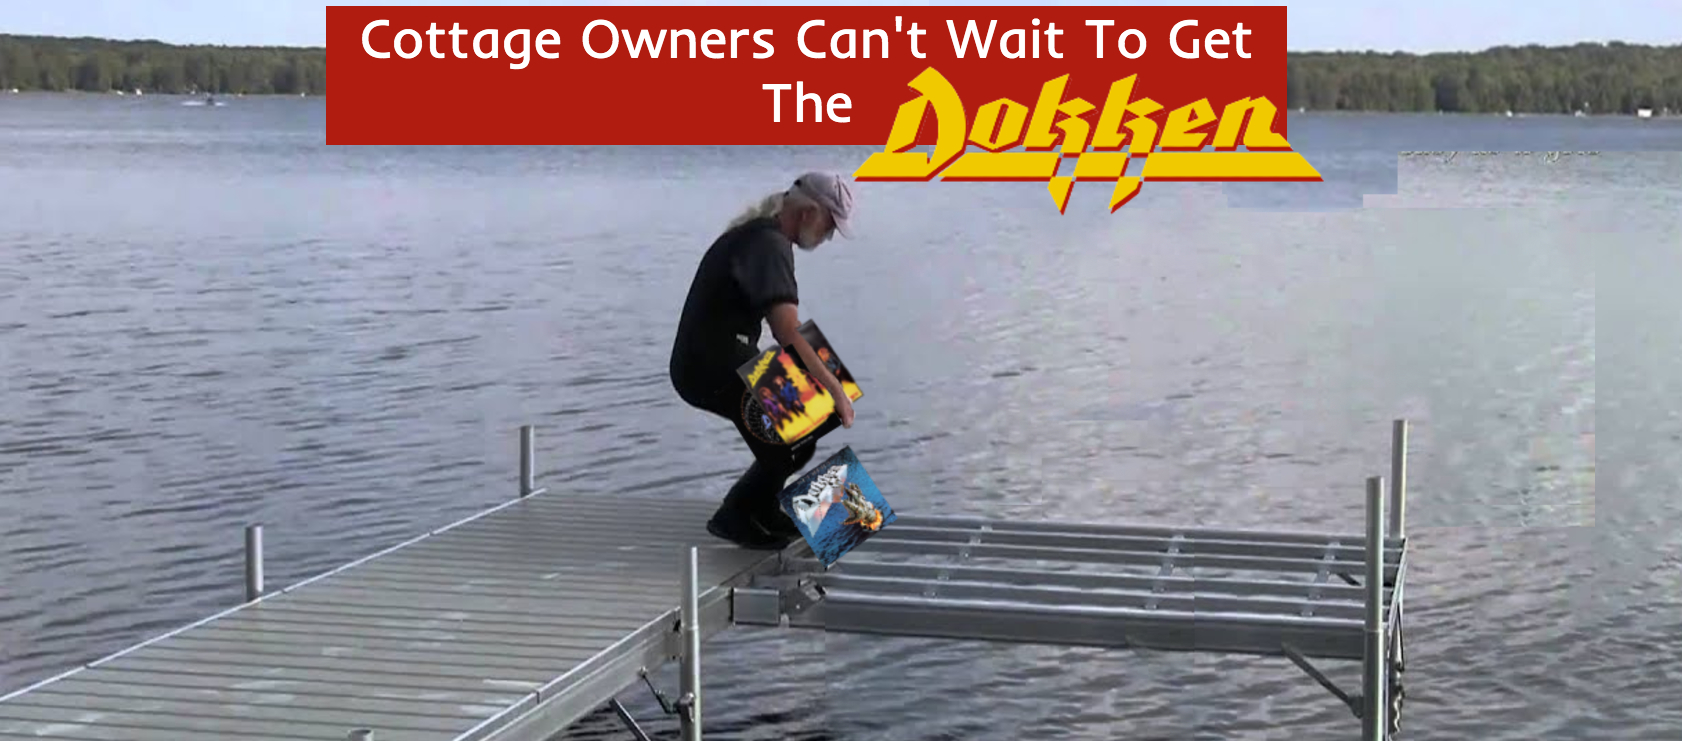 Older man carrying out Dokken records to the incomplete end of the dock. Clearly a dock piece was replaced in photoshop